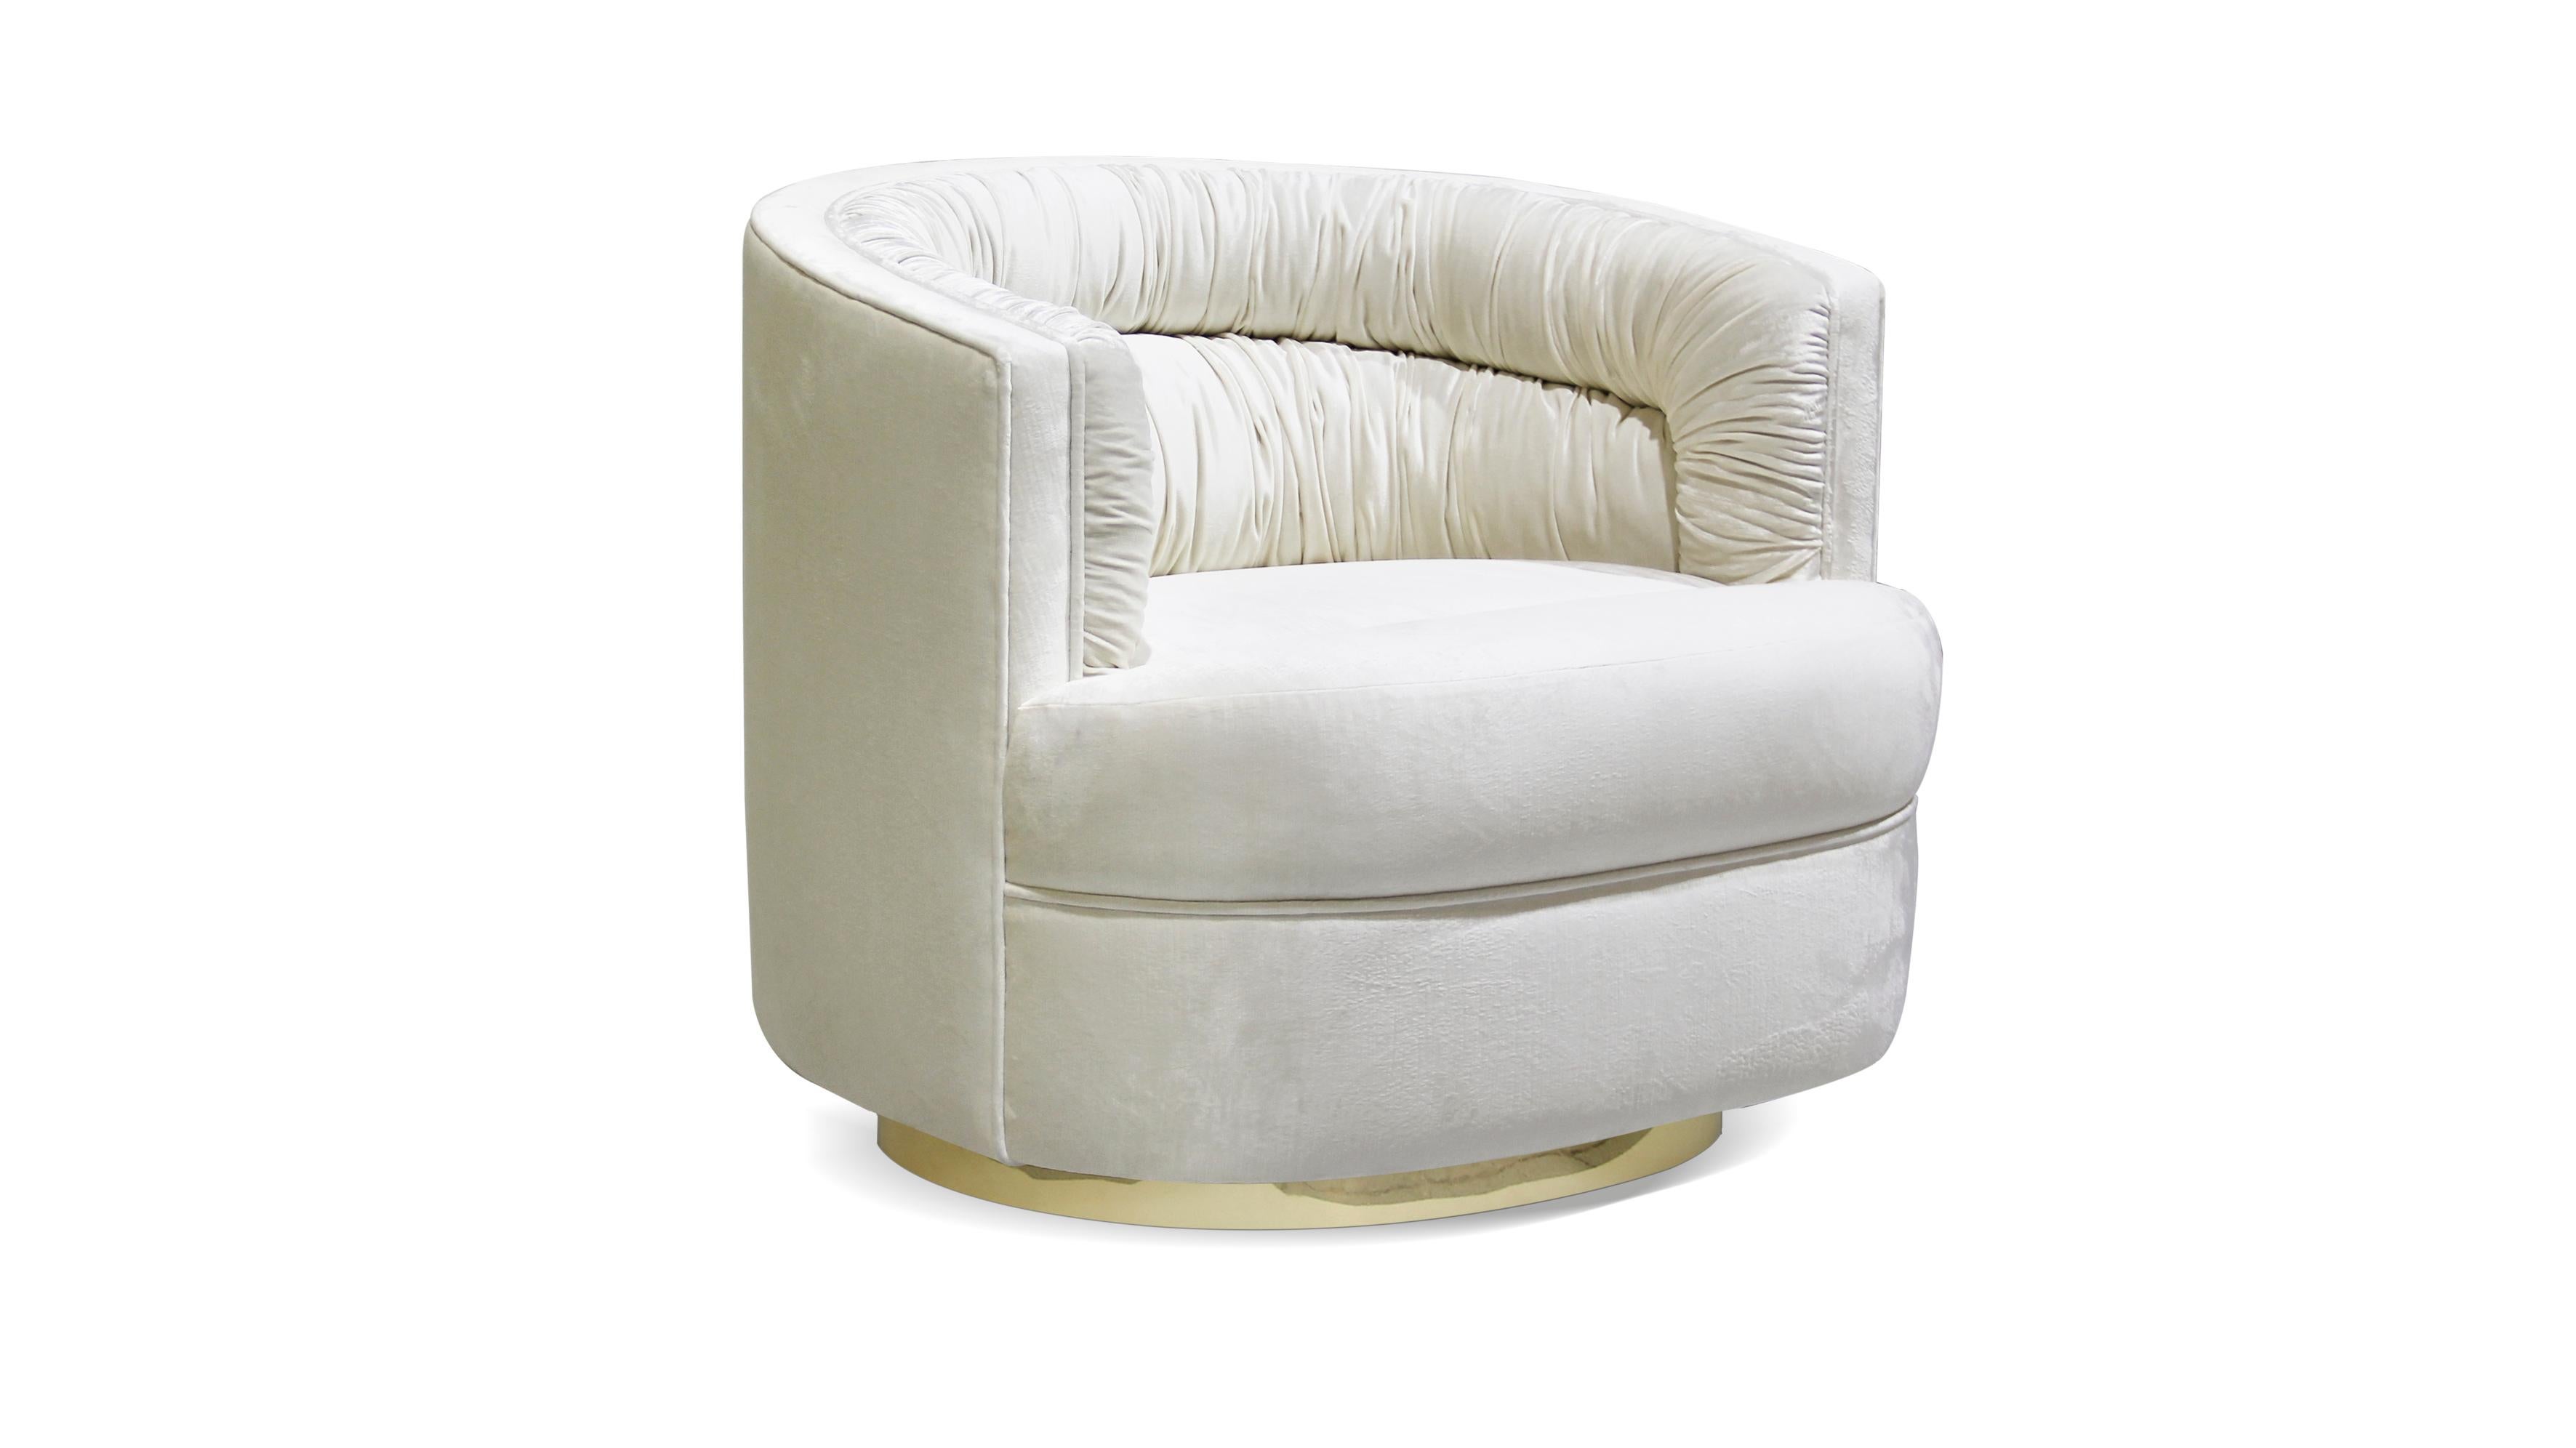 Like the olive to a martini, sipping cocktails and lounging in luxury go hand-in-hand. The plush body of the cocktail armchair hugs your every curve while you softly melt into the creamy upholstery fabric. Cheers!

Options
Upholstery: Available in